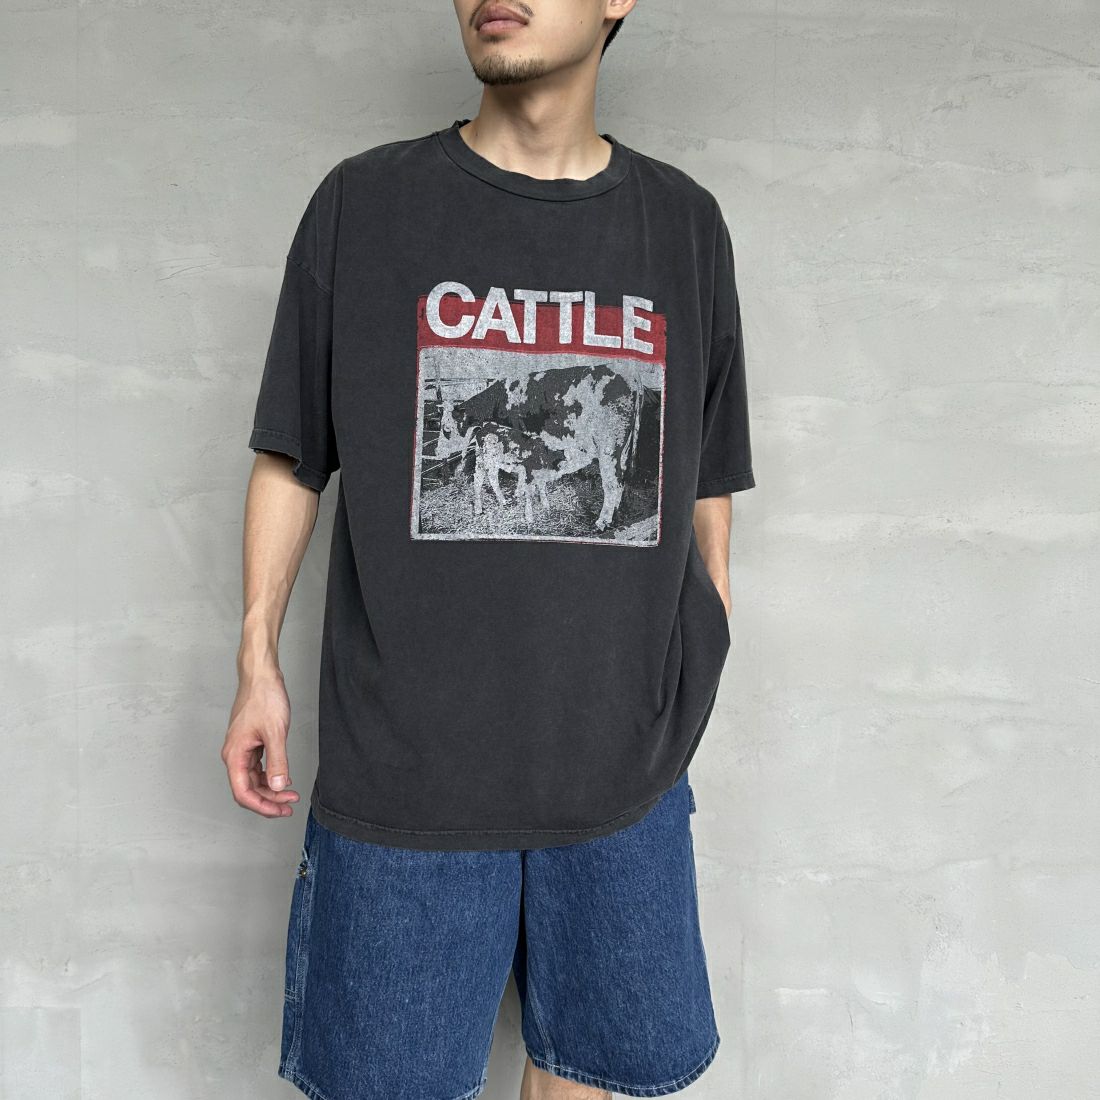 REMI RELIEF [レミレリーフ] 別注 ビッグプリントTシャツ CATTLE [RN26349305-JF] BLACK &&モデル身長：168cm 着用サイズ：M&&